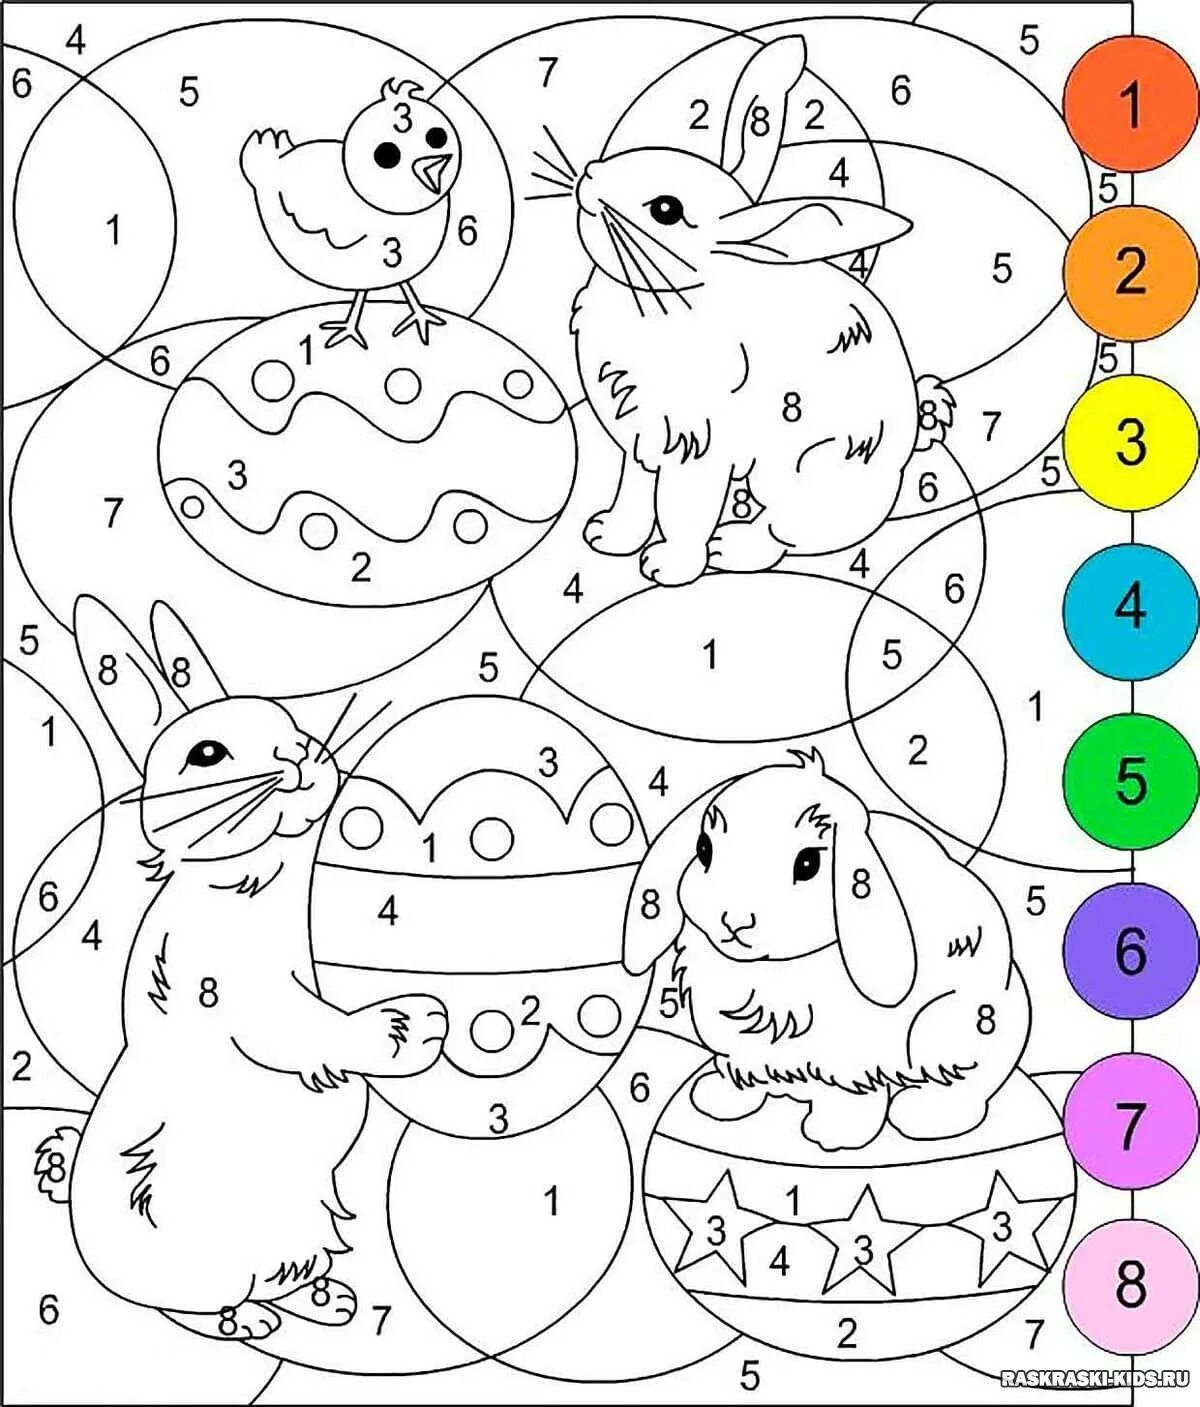 Delightful coloring for girls by numbers for 5 years